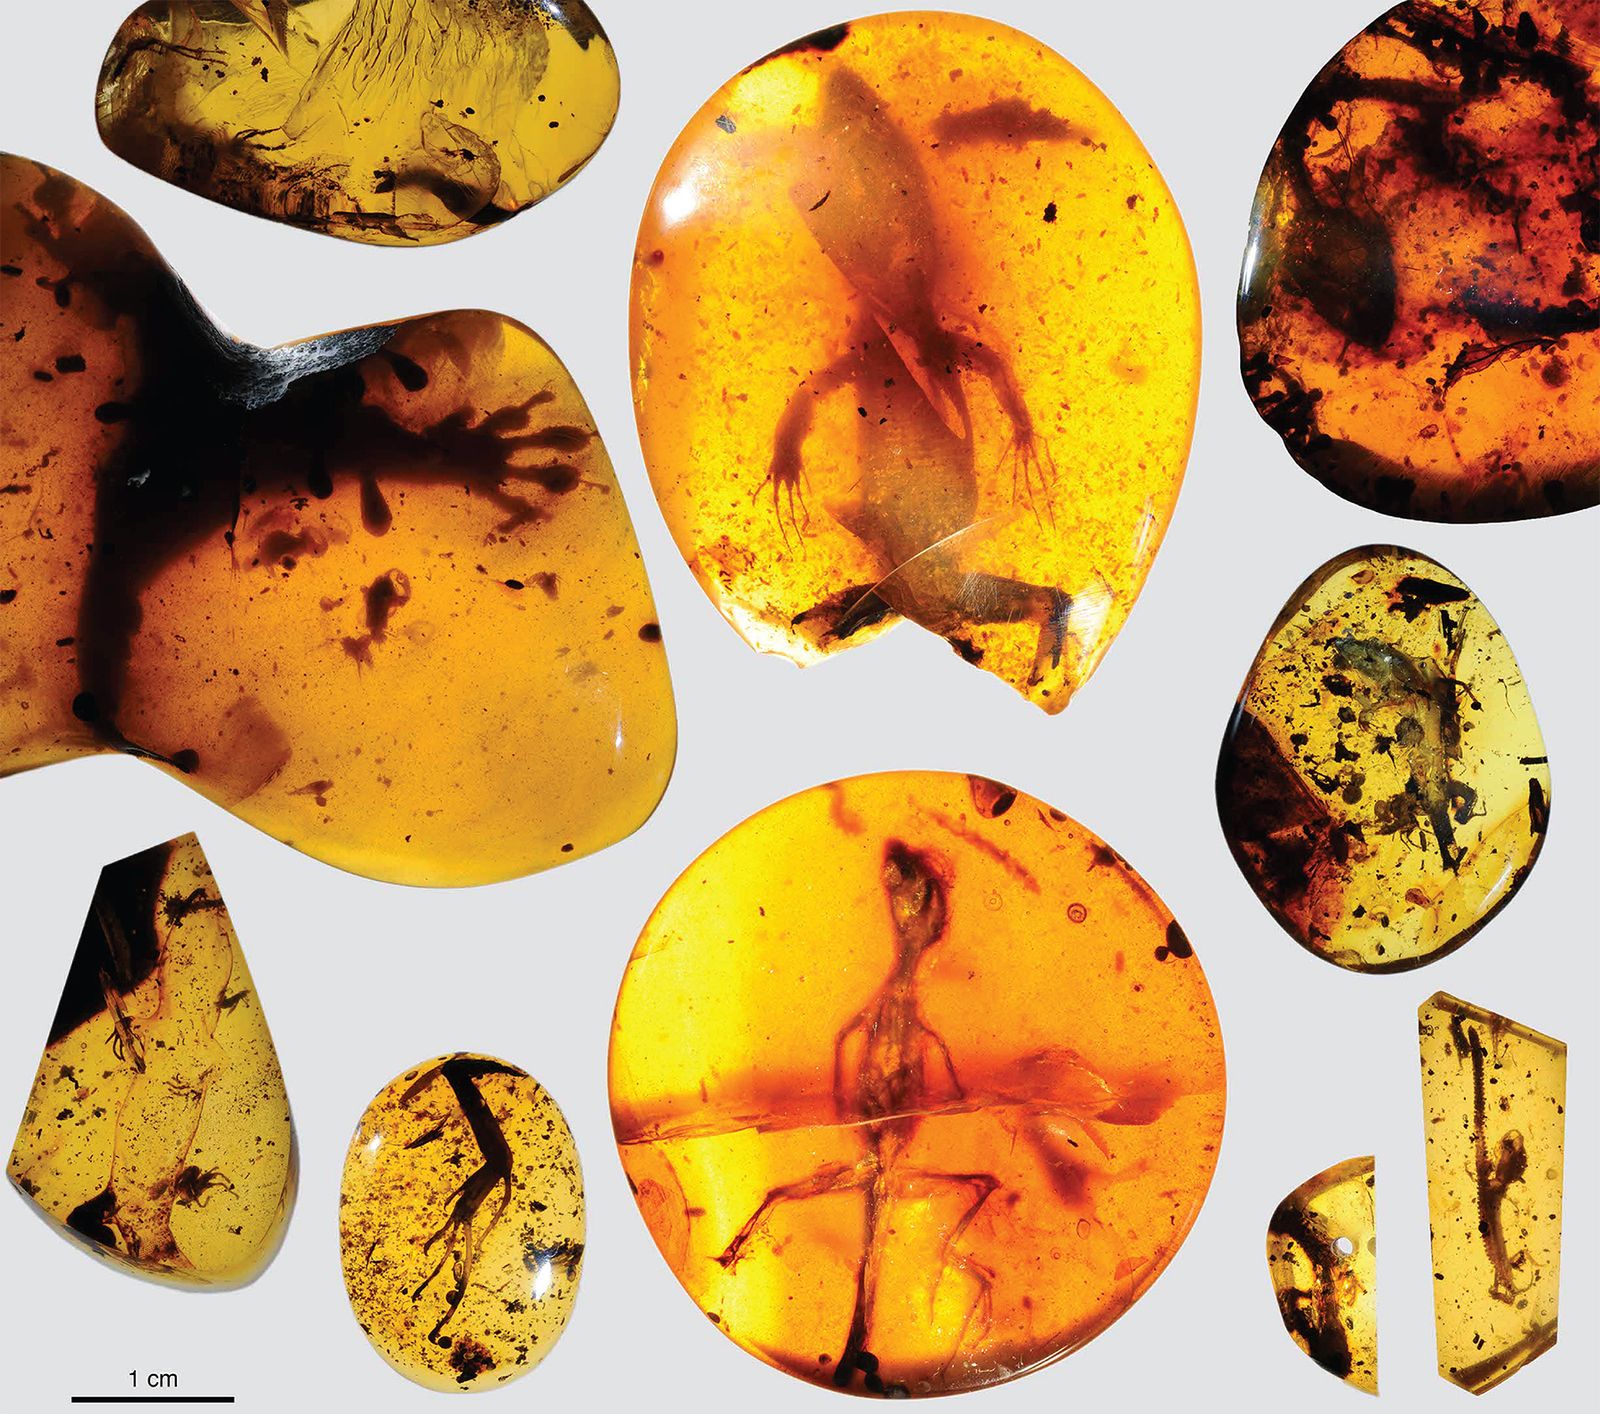 Exploring the Geology and Formation of Amber: From Tree Resin to